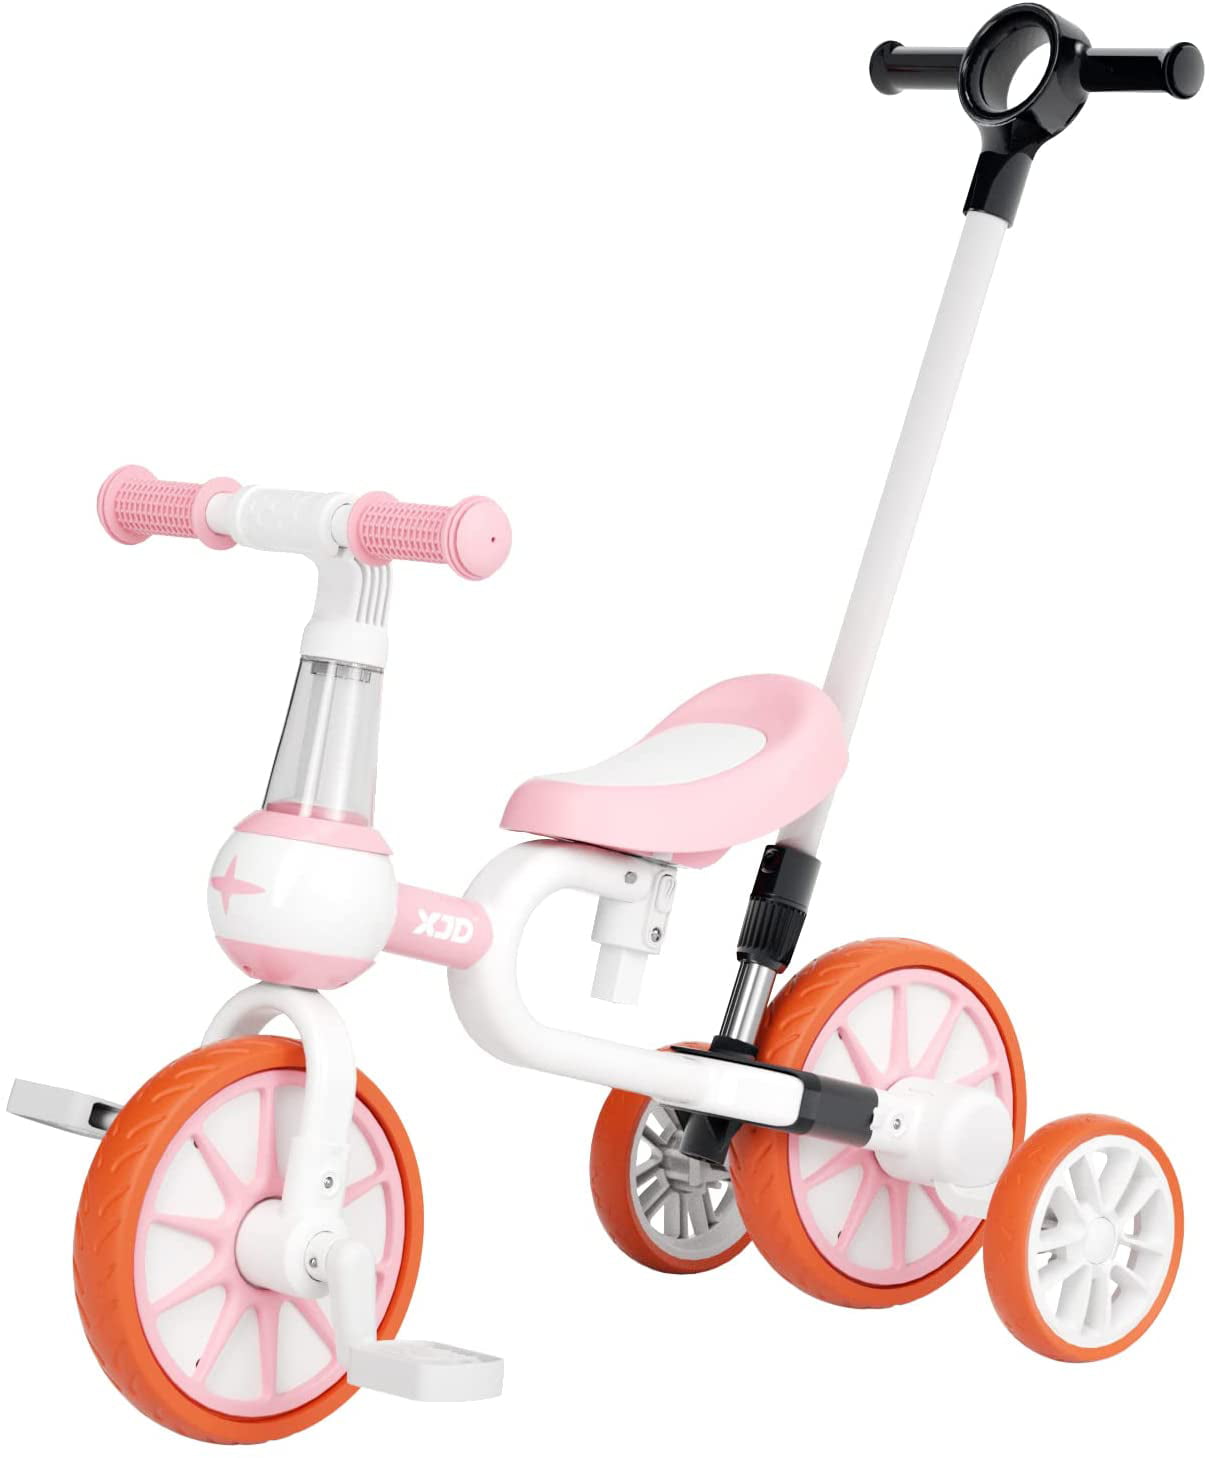 New Classic Toys Baby Wooden Carrier Bike for Old Ride On Trike Toy Toddlers First Tricycle for One Year Old Children Scooter for Age 18 Months with 4 Wheels Pink Color 